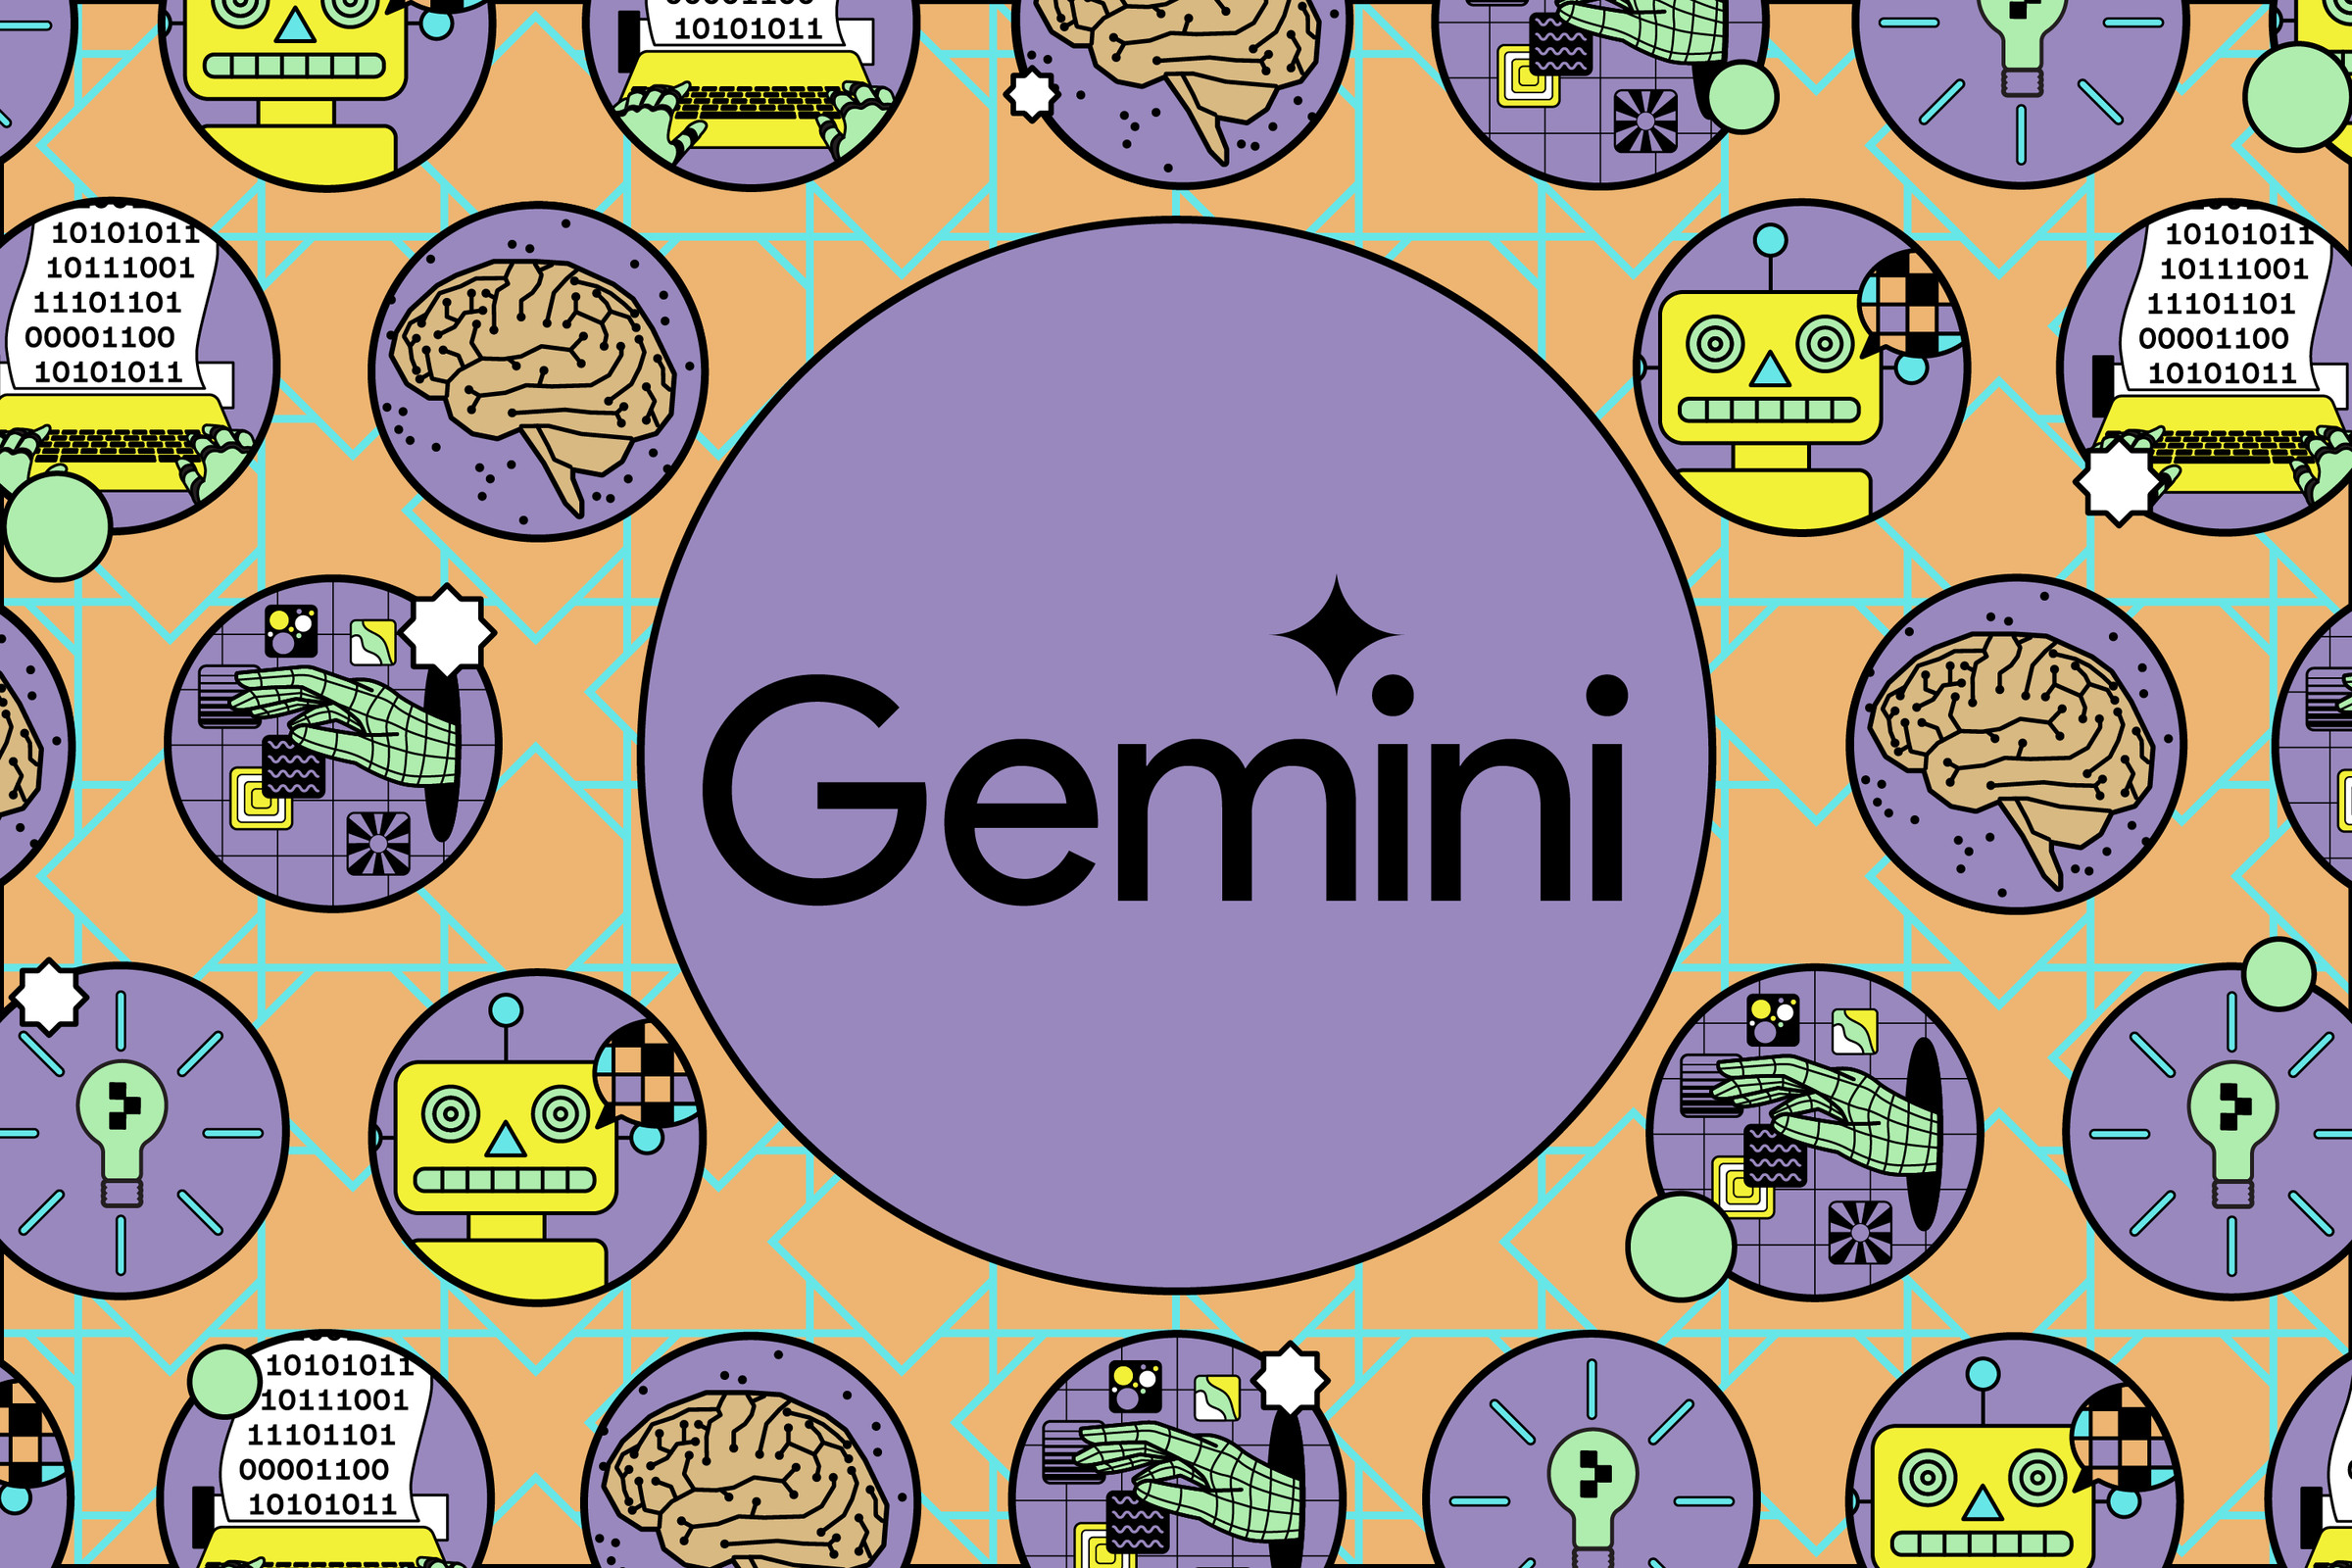 Vector illustration of the Google Gemini logo in front of various aspects of AI.